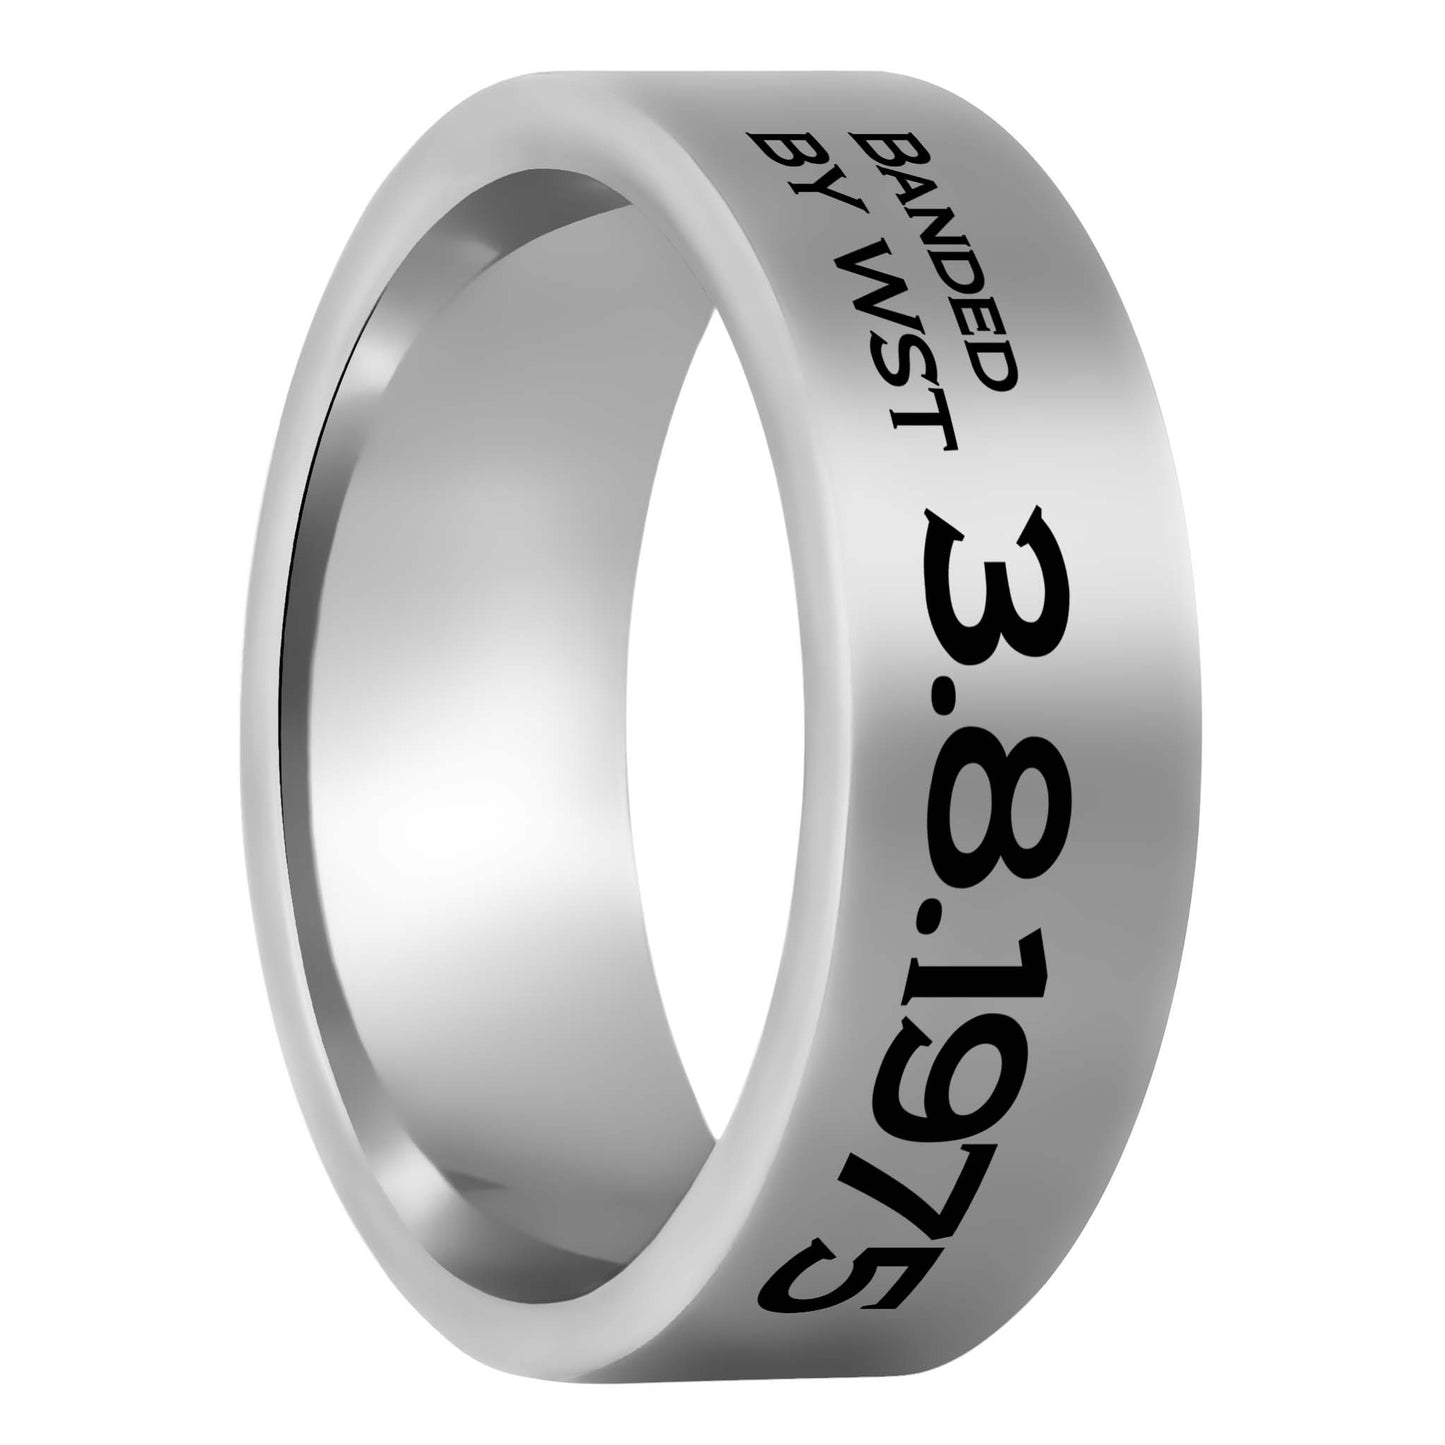 Duck Band Style Custom Engraved Tungsten Men's Ring